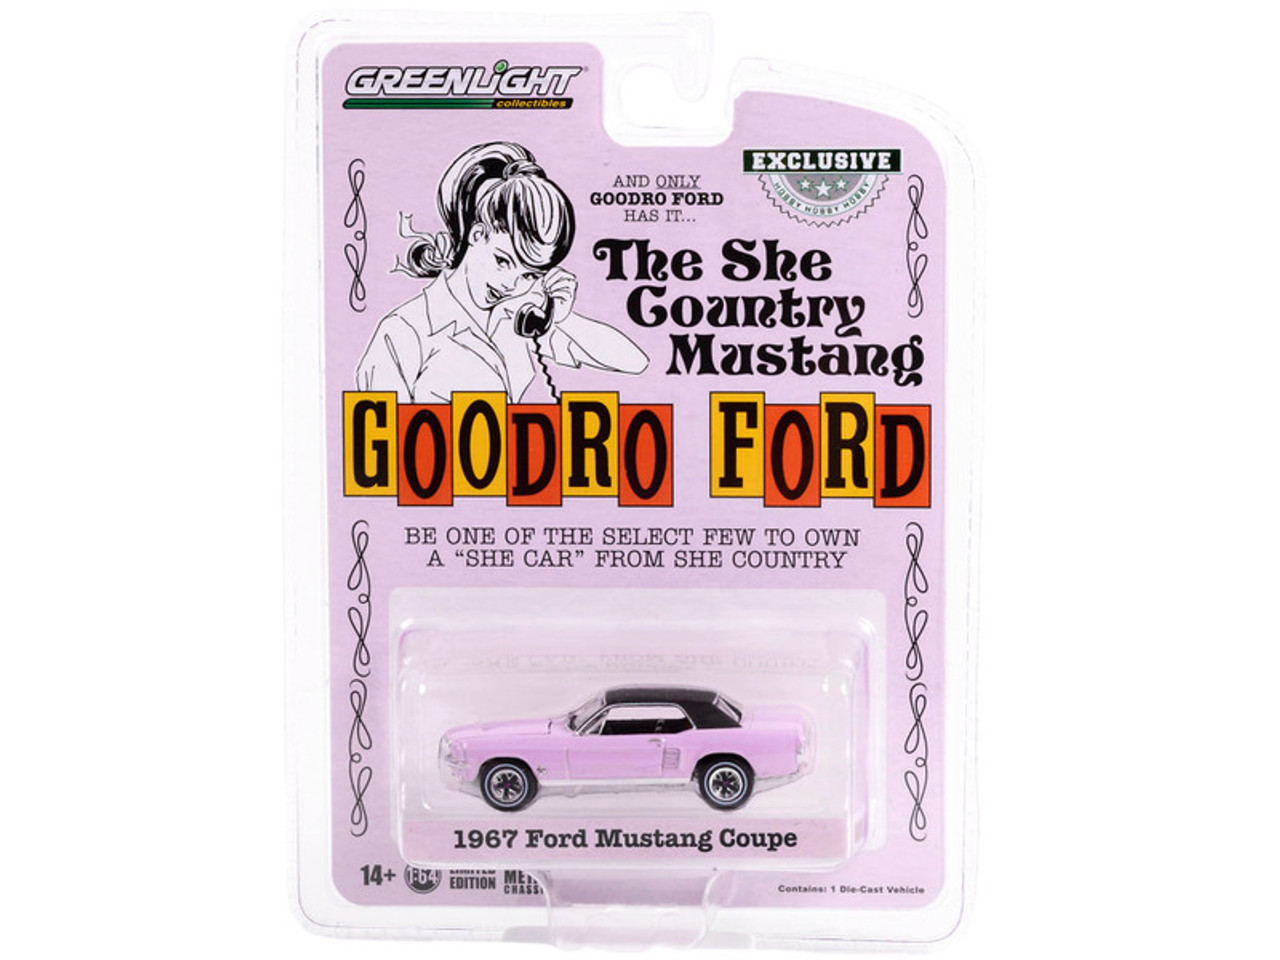 1967 Ford Mustang Evening Orchid Pink with Black Top "She Country Special" "Bill Goodro Ford Denver Colorado" "Hobby Exclusive" Series 1/64 Diecast Model Car by Greenlight